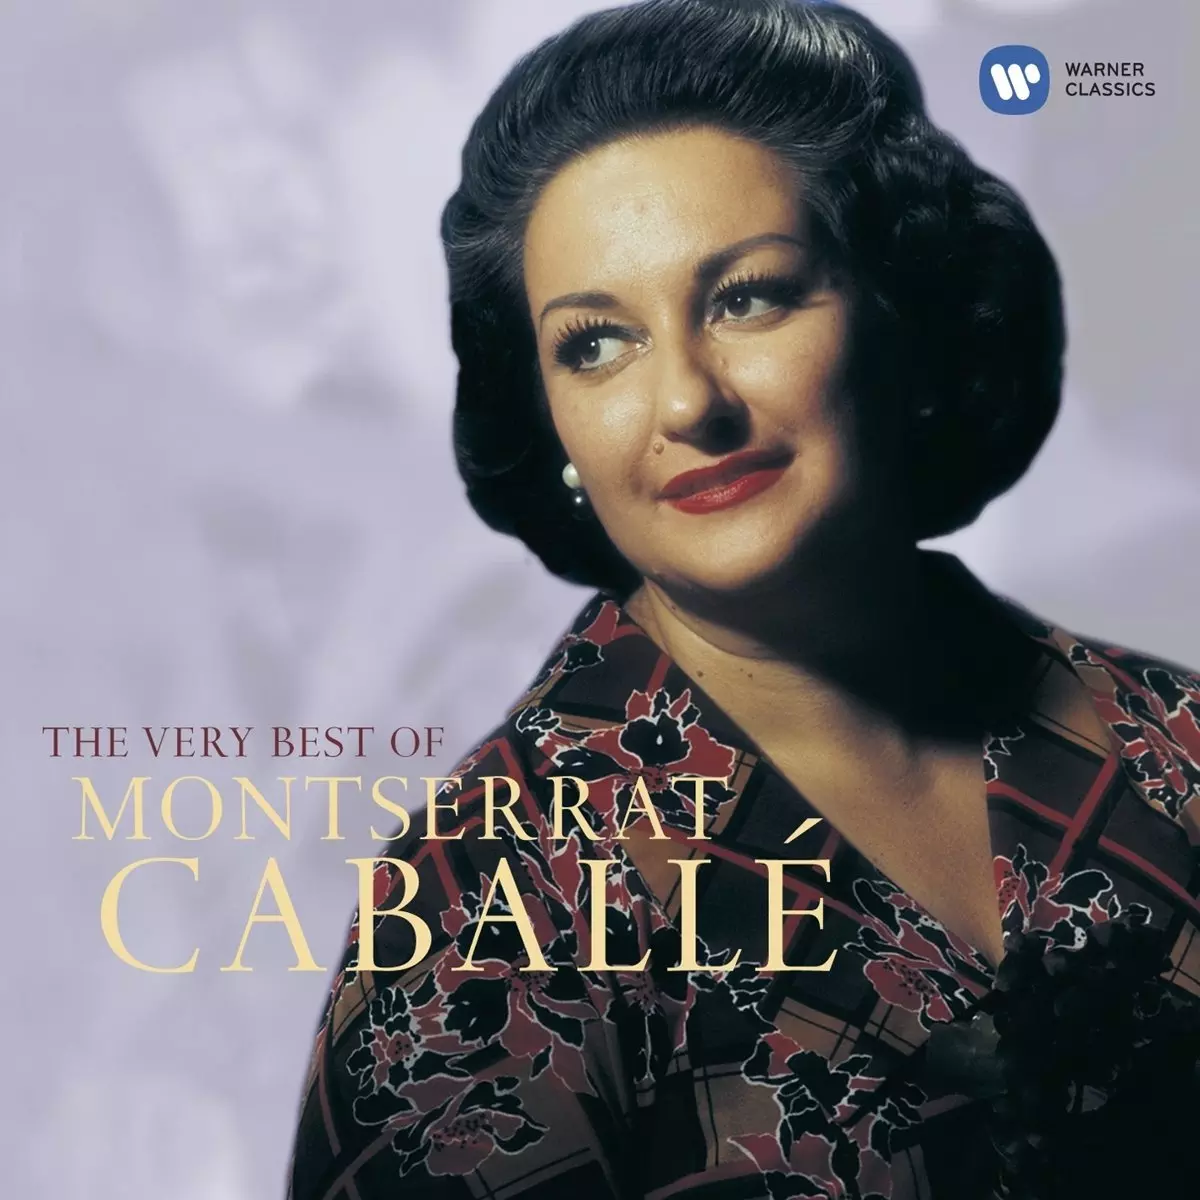 The Very Best of Montserrat Caballe